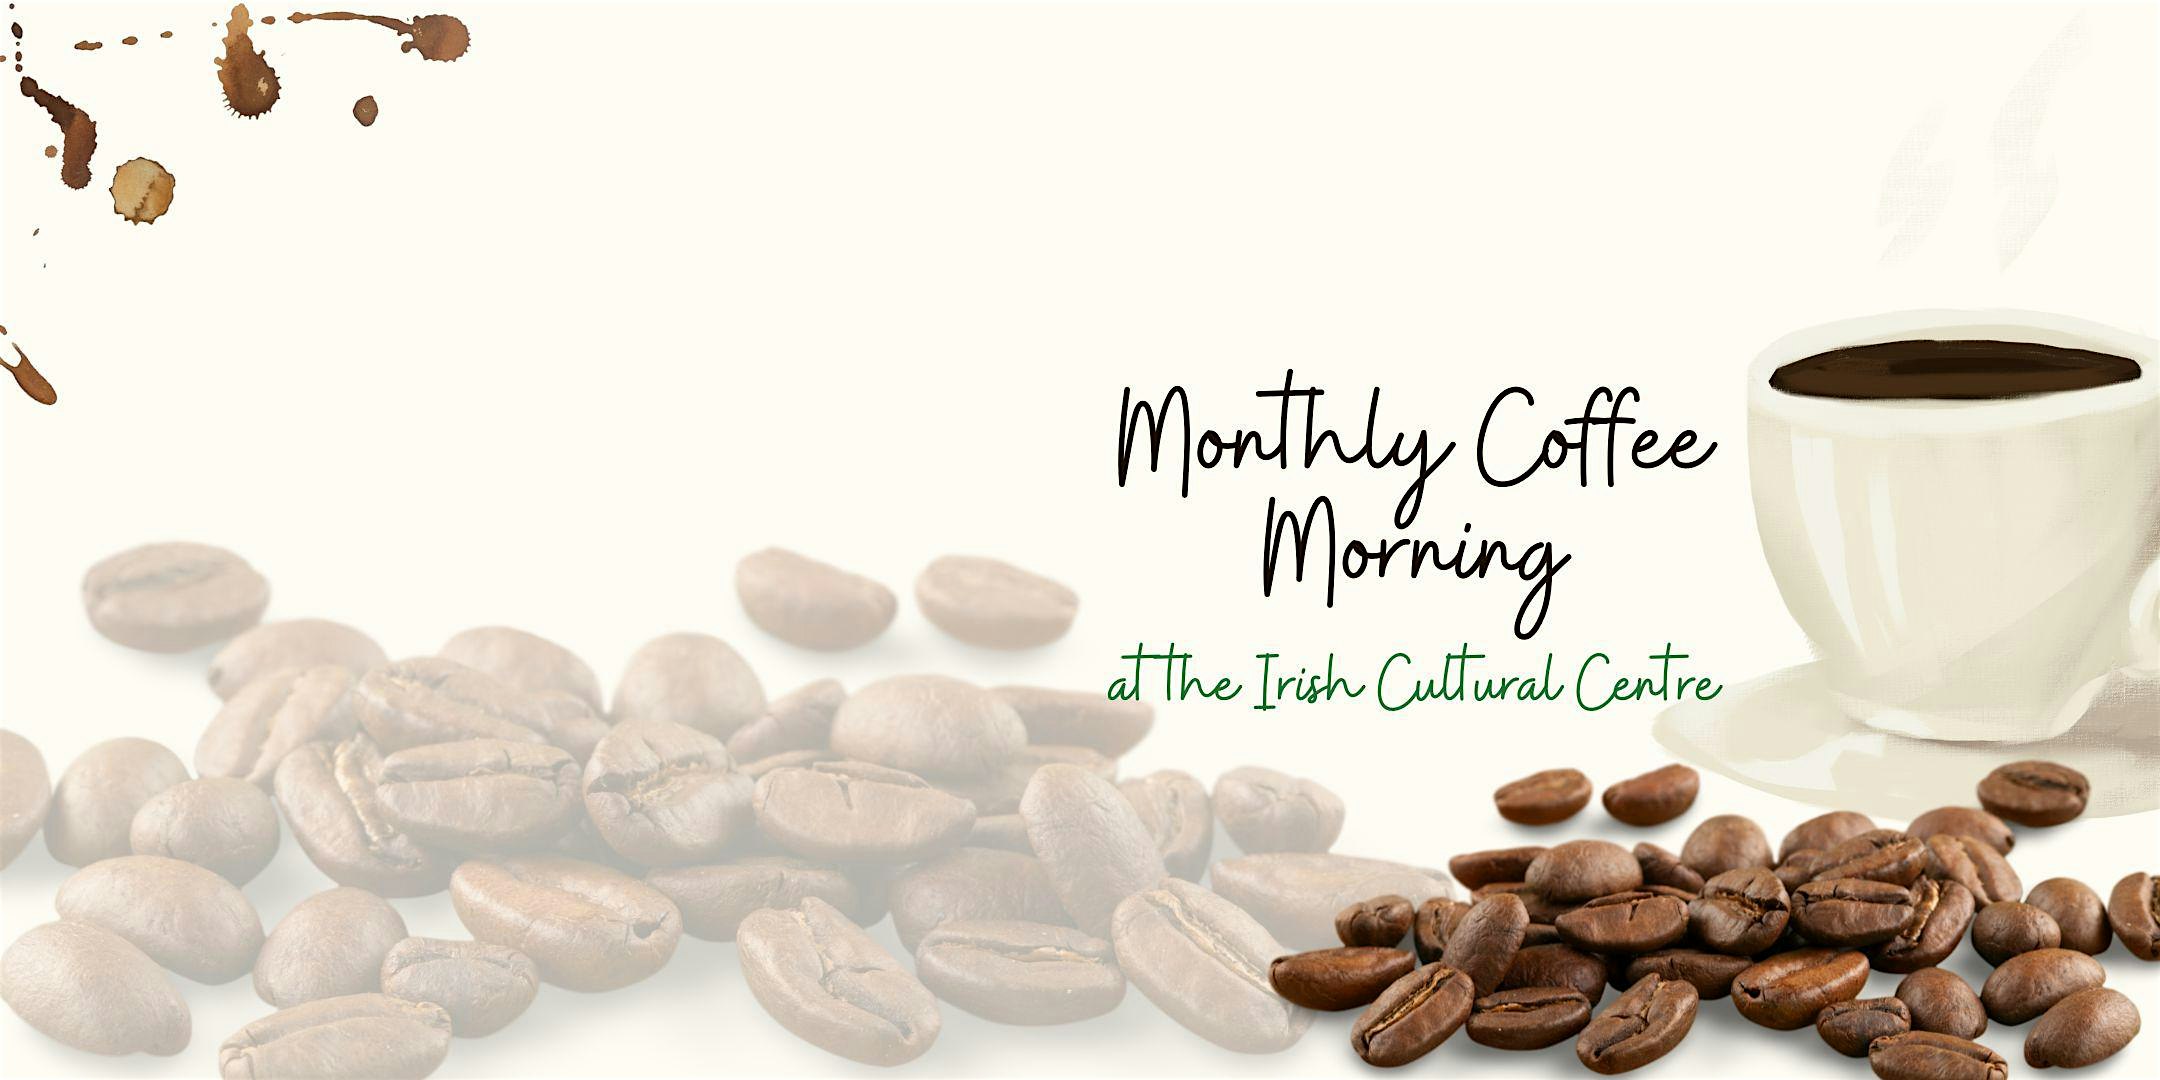 Monthly Coffee Morning at the Irish Cultural Centre